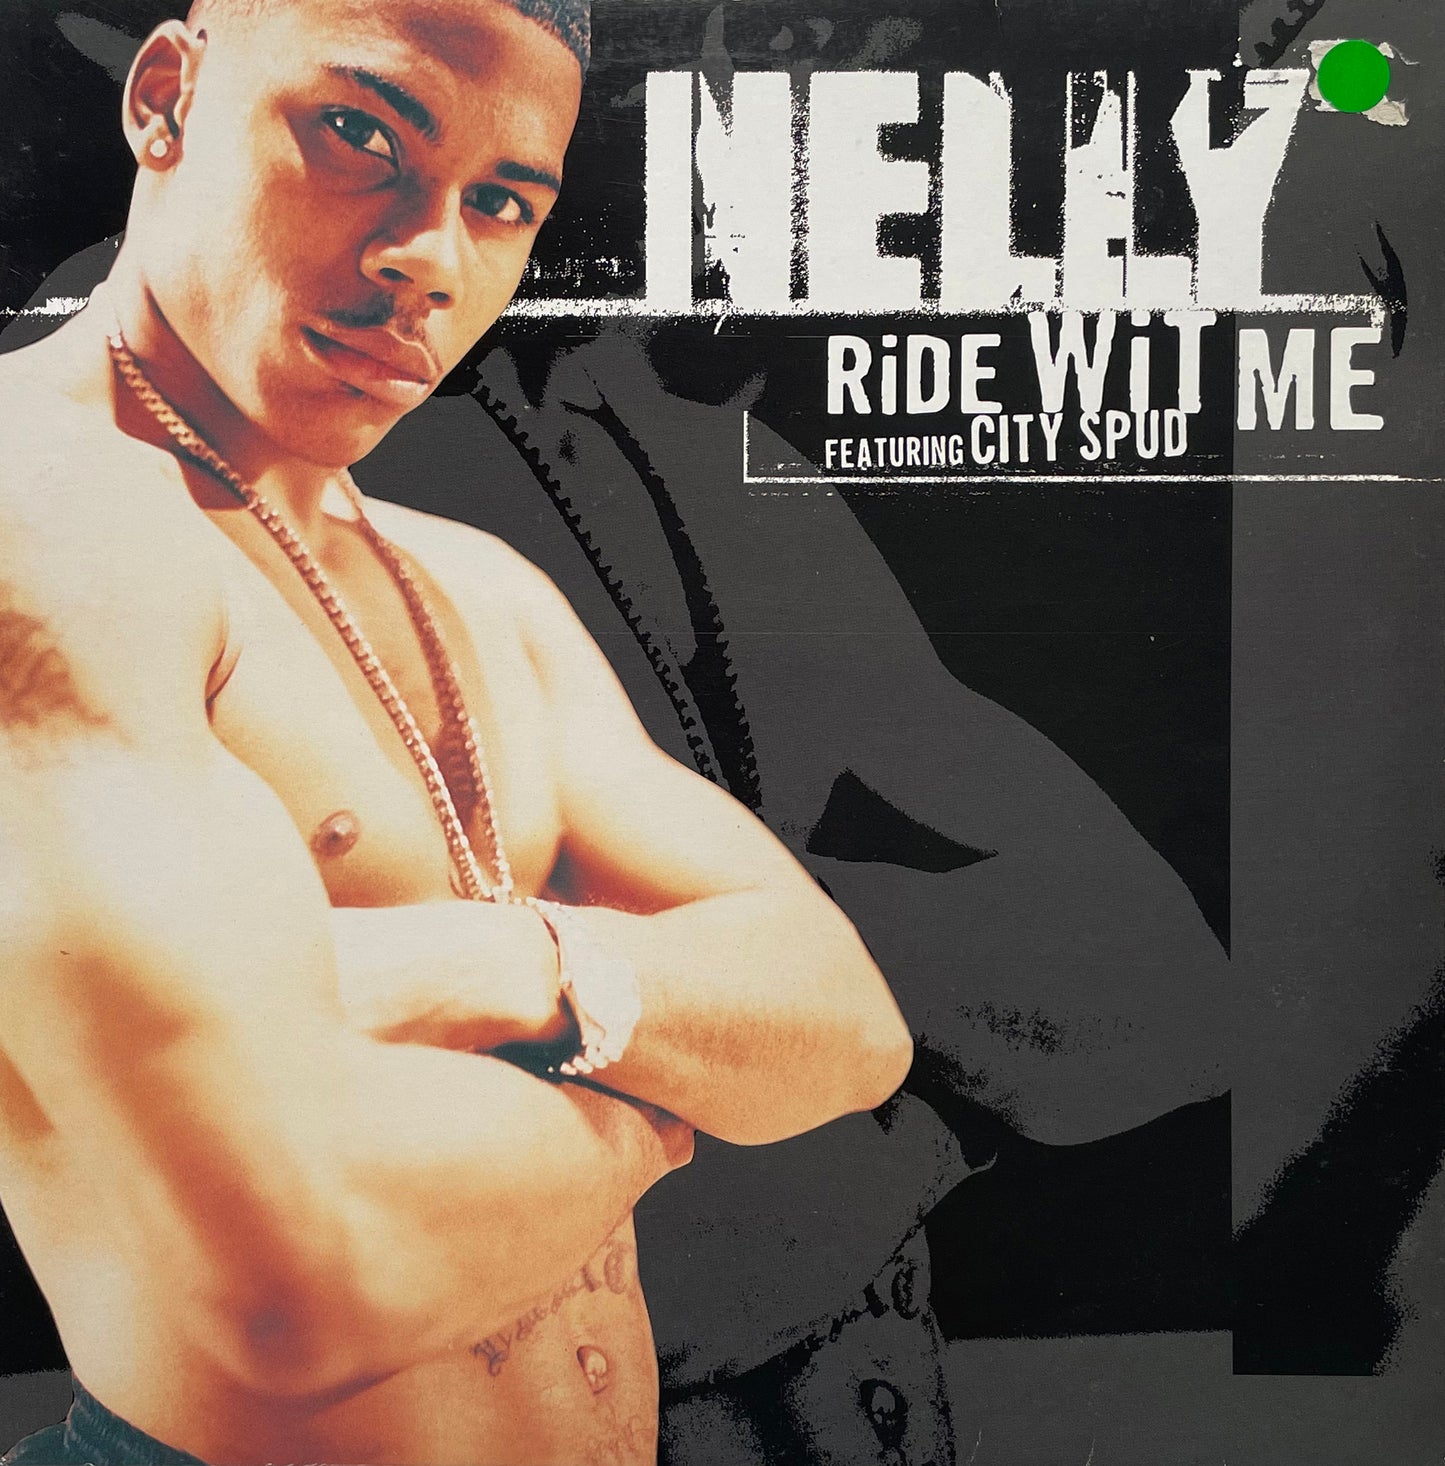 Nelly Feat City Spud - Ride Wit Me 12"